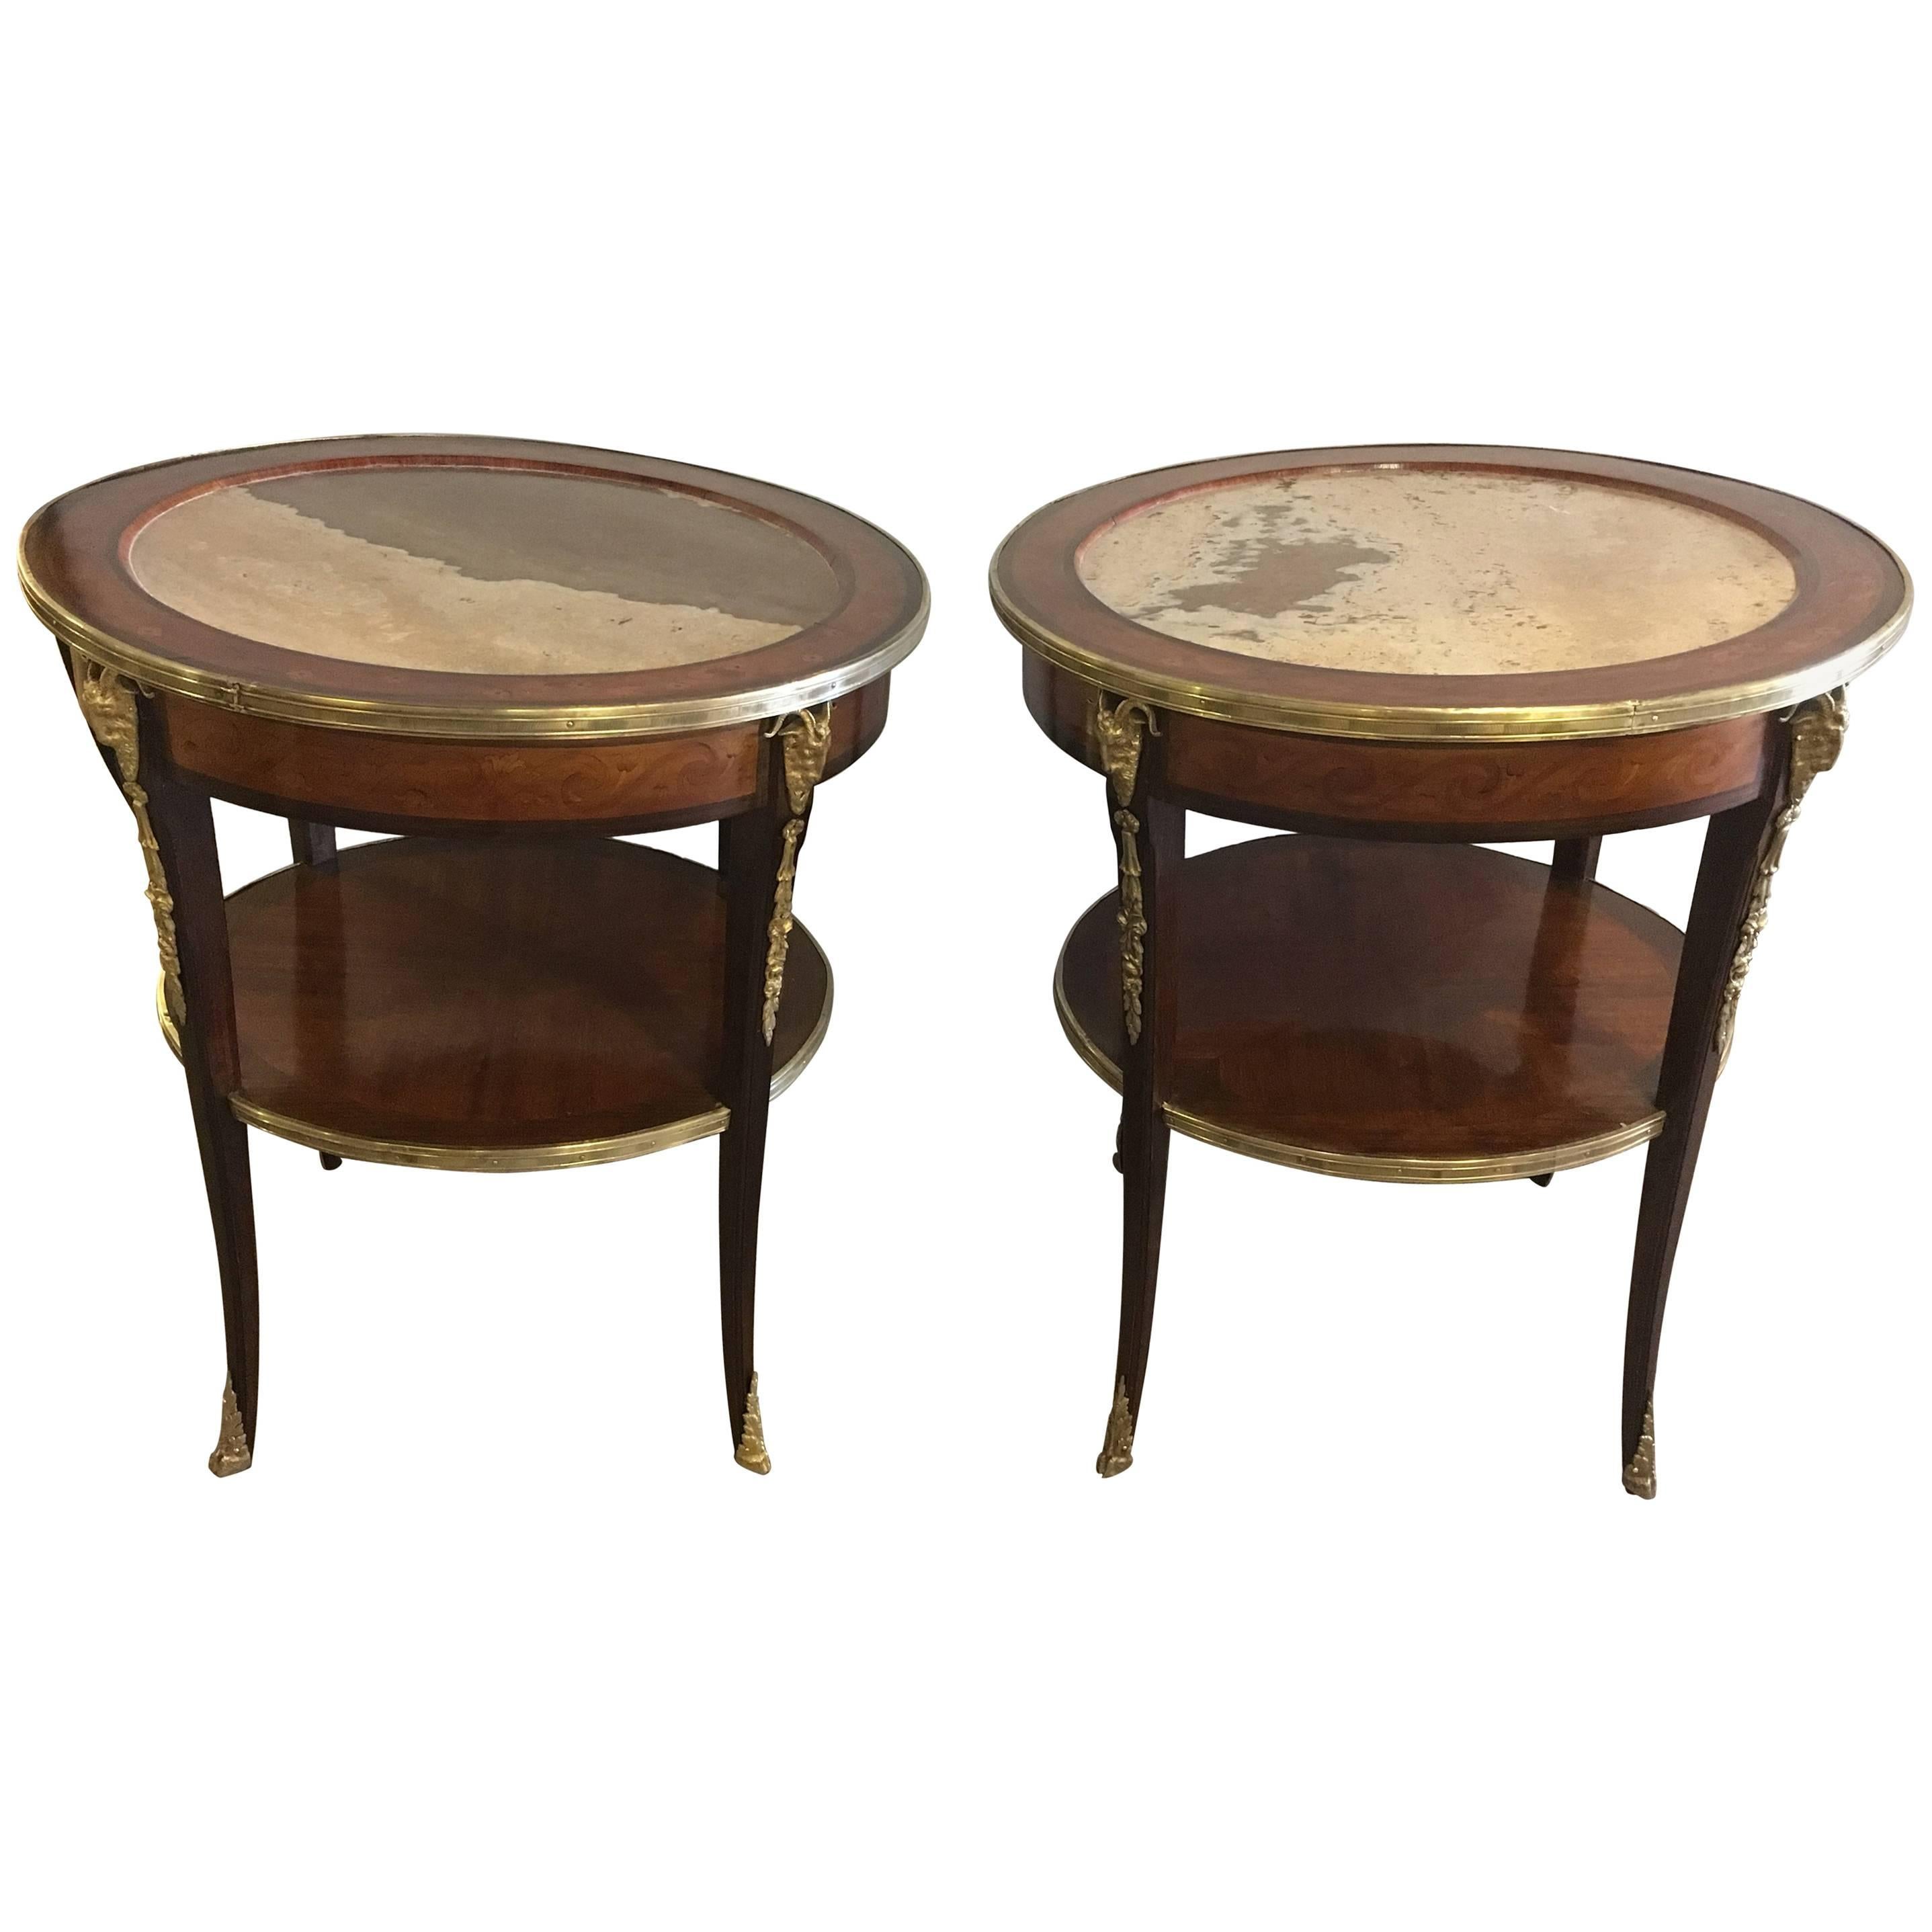 Pair of Louis XV Style Marble Top Tables or Gueridons with Rams Heads